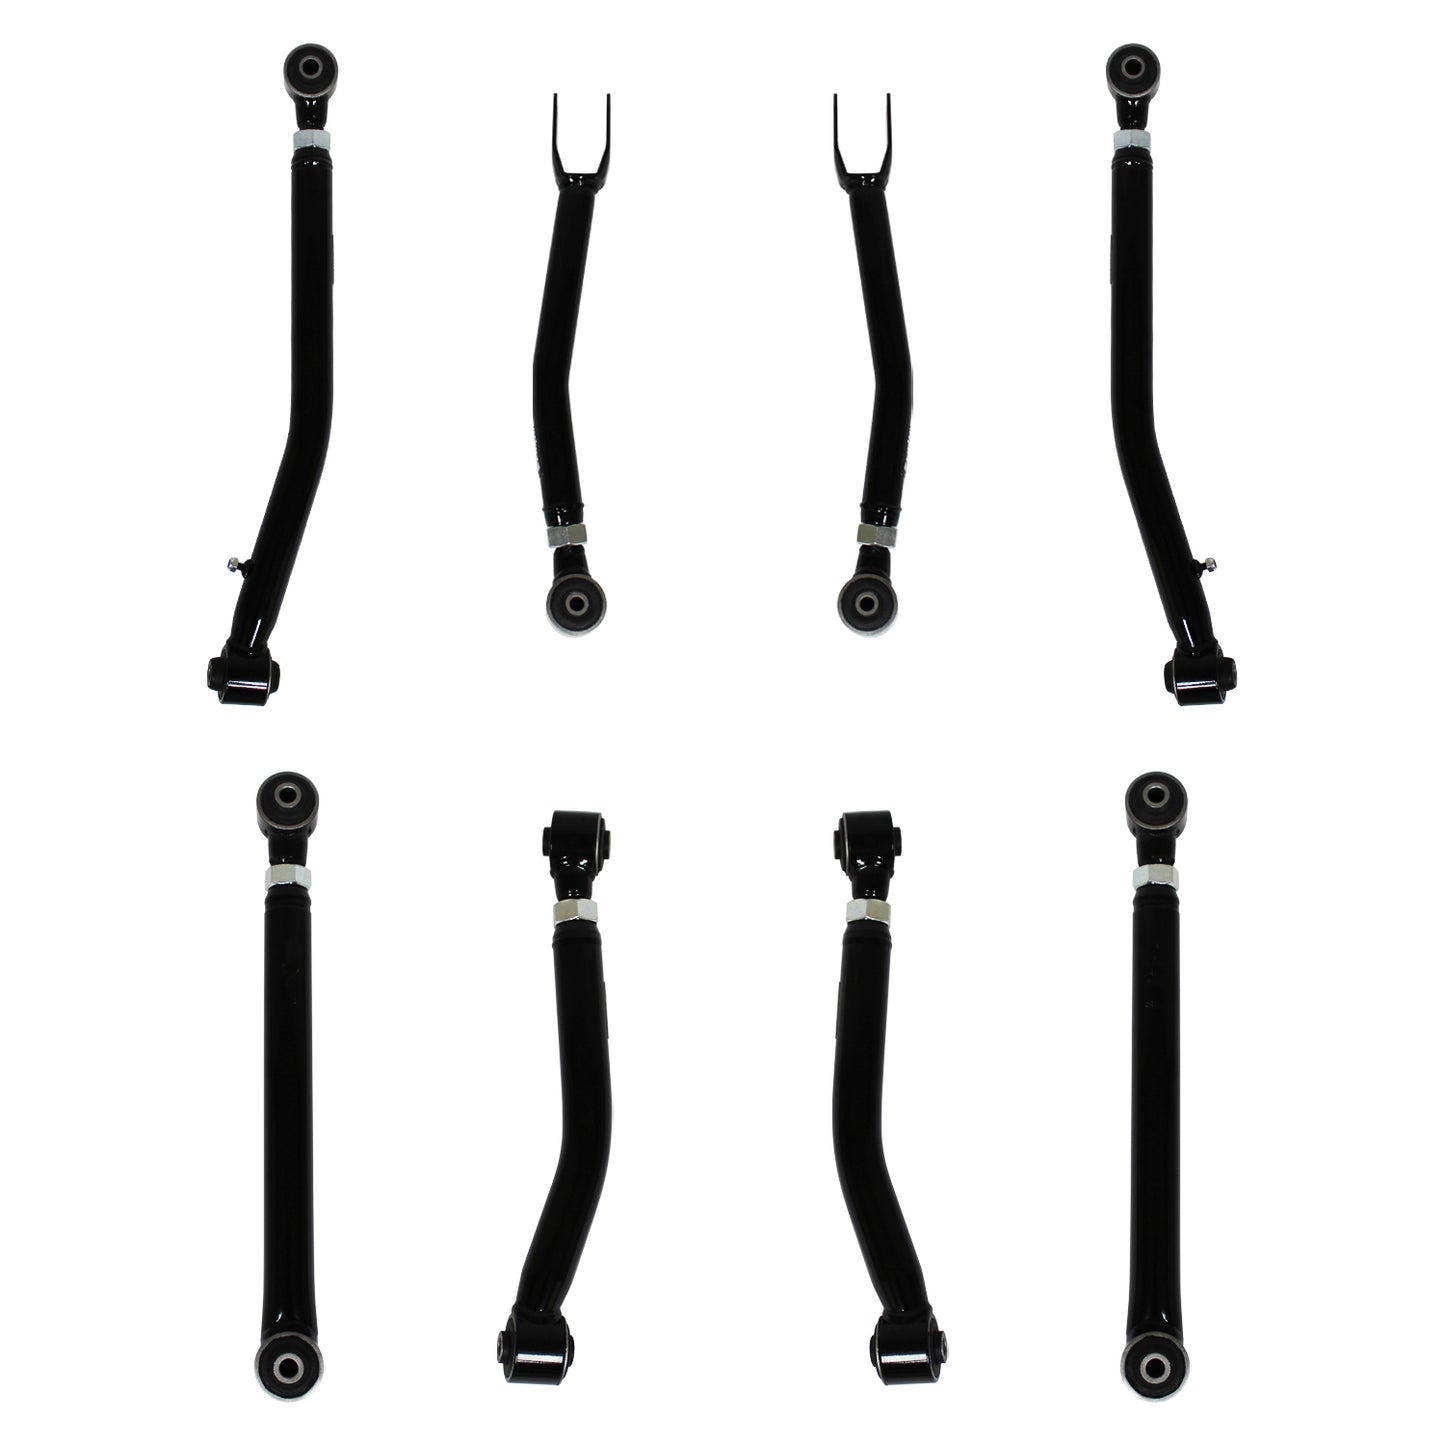 Raptor Series RSO Front and Rear Control Arms Complete Set 0-4.5in Lift for Wrangler JL/JLU 170118-440300